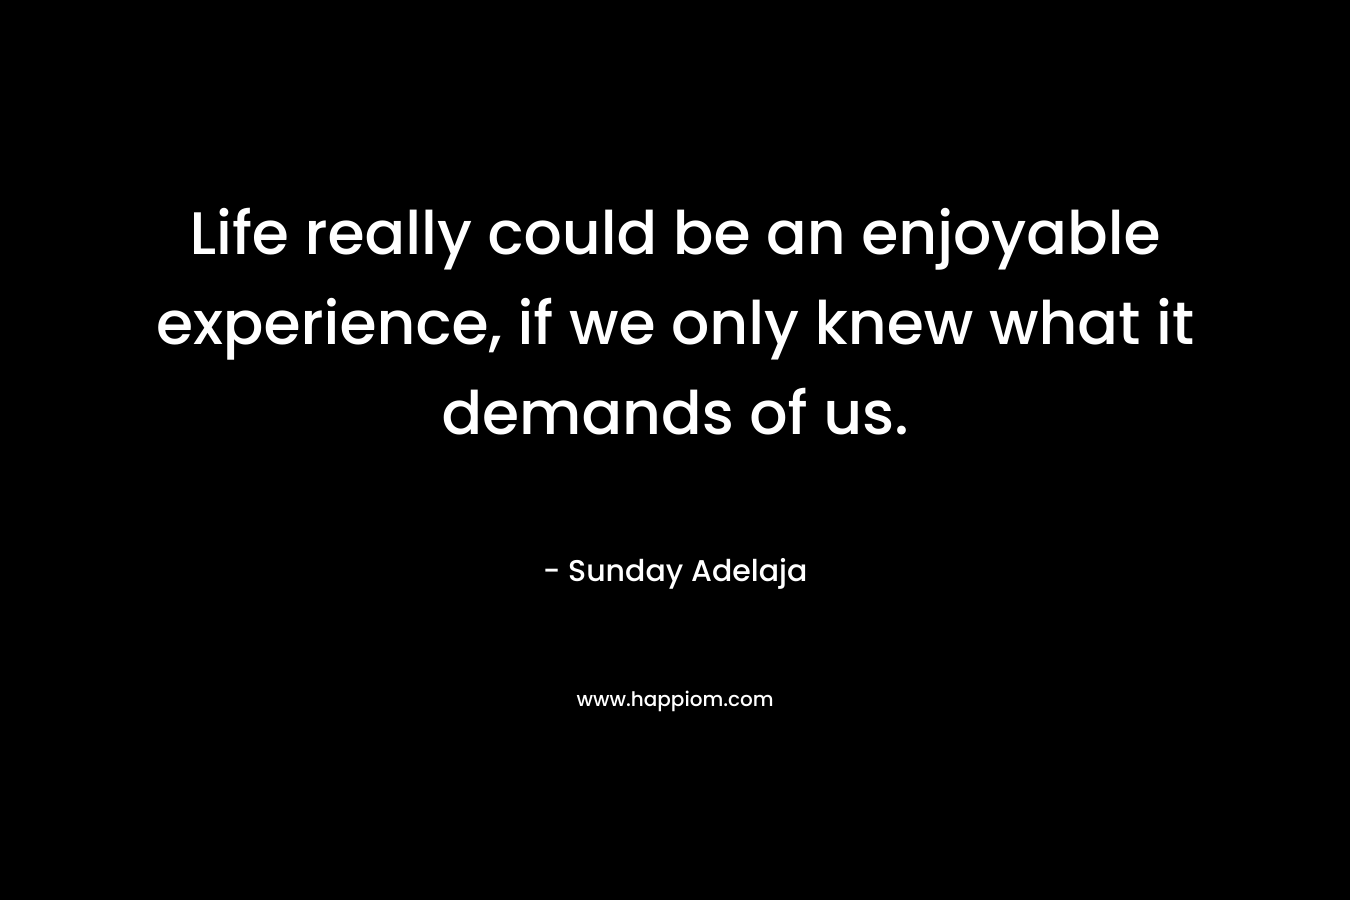 Life really could be an enjoyable experience, if we only knew what it demands of us.